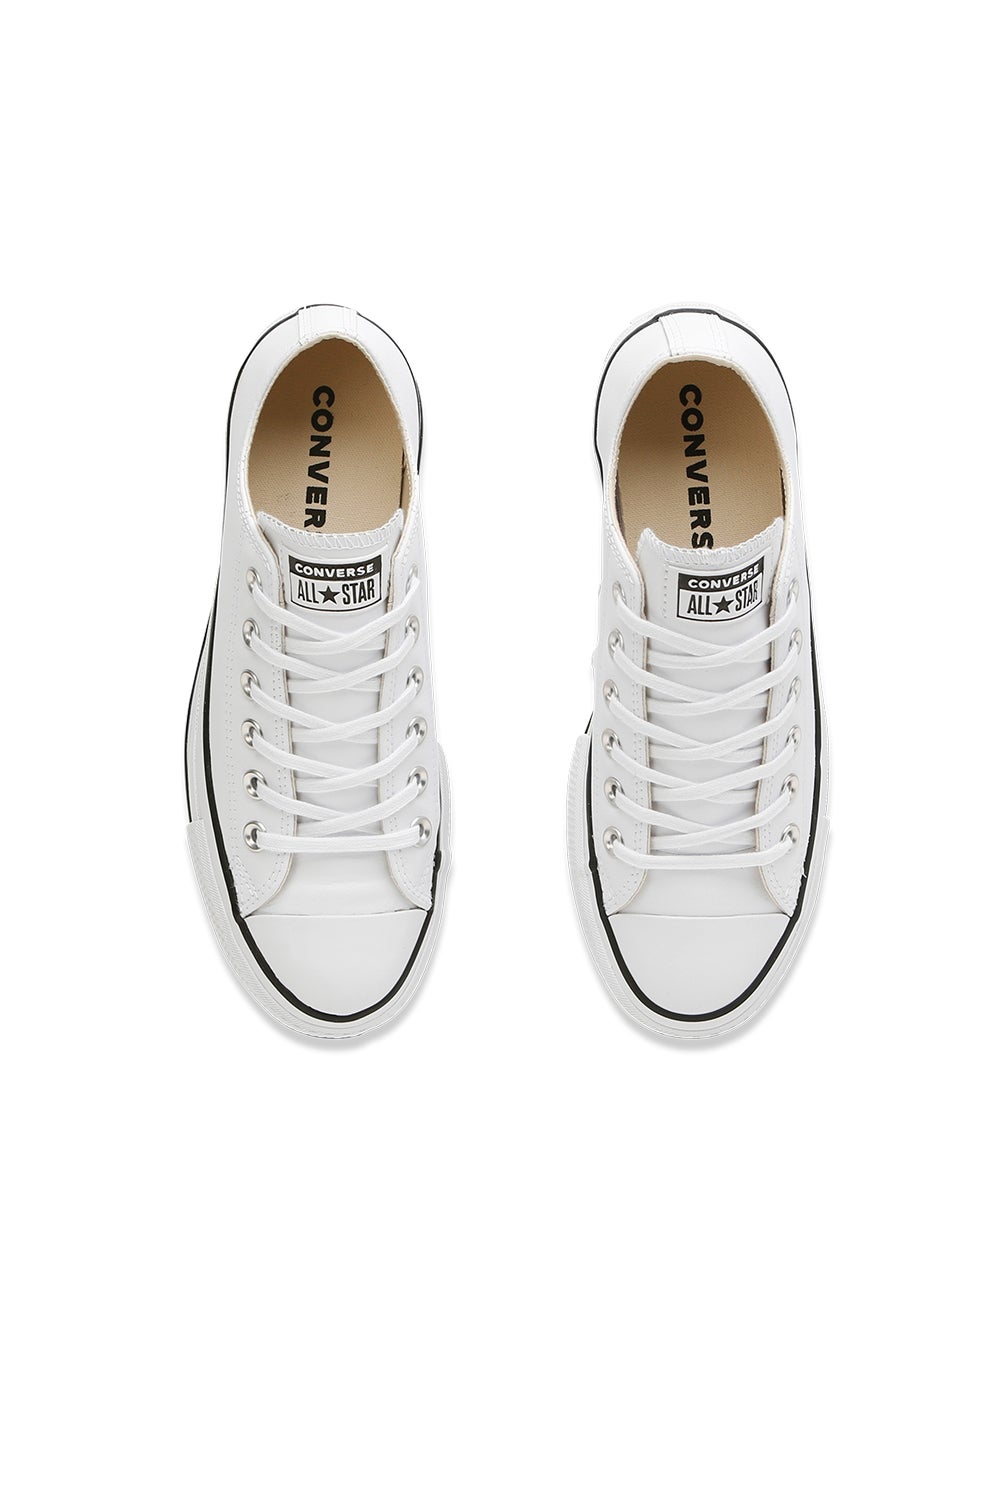 converse chuck taylor leather low